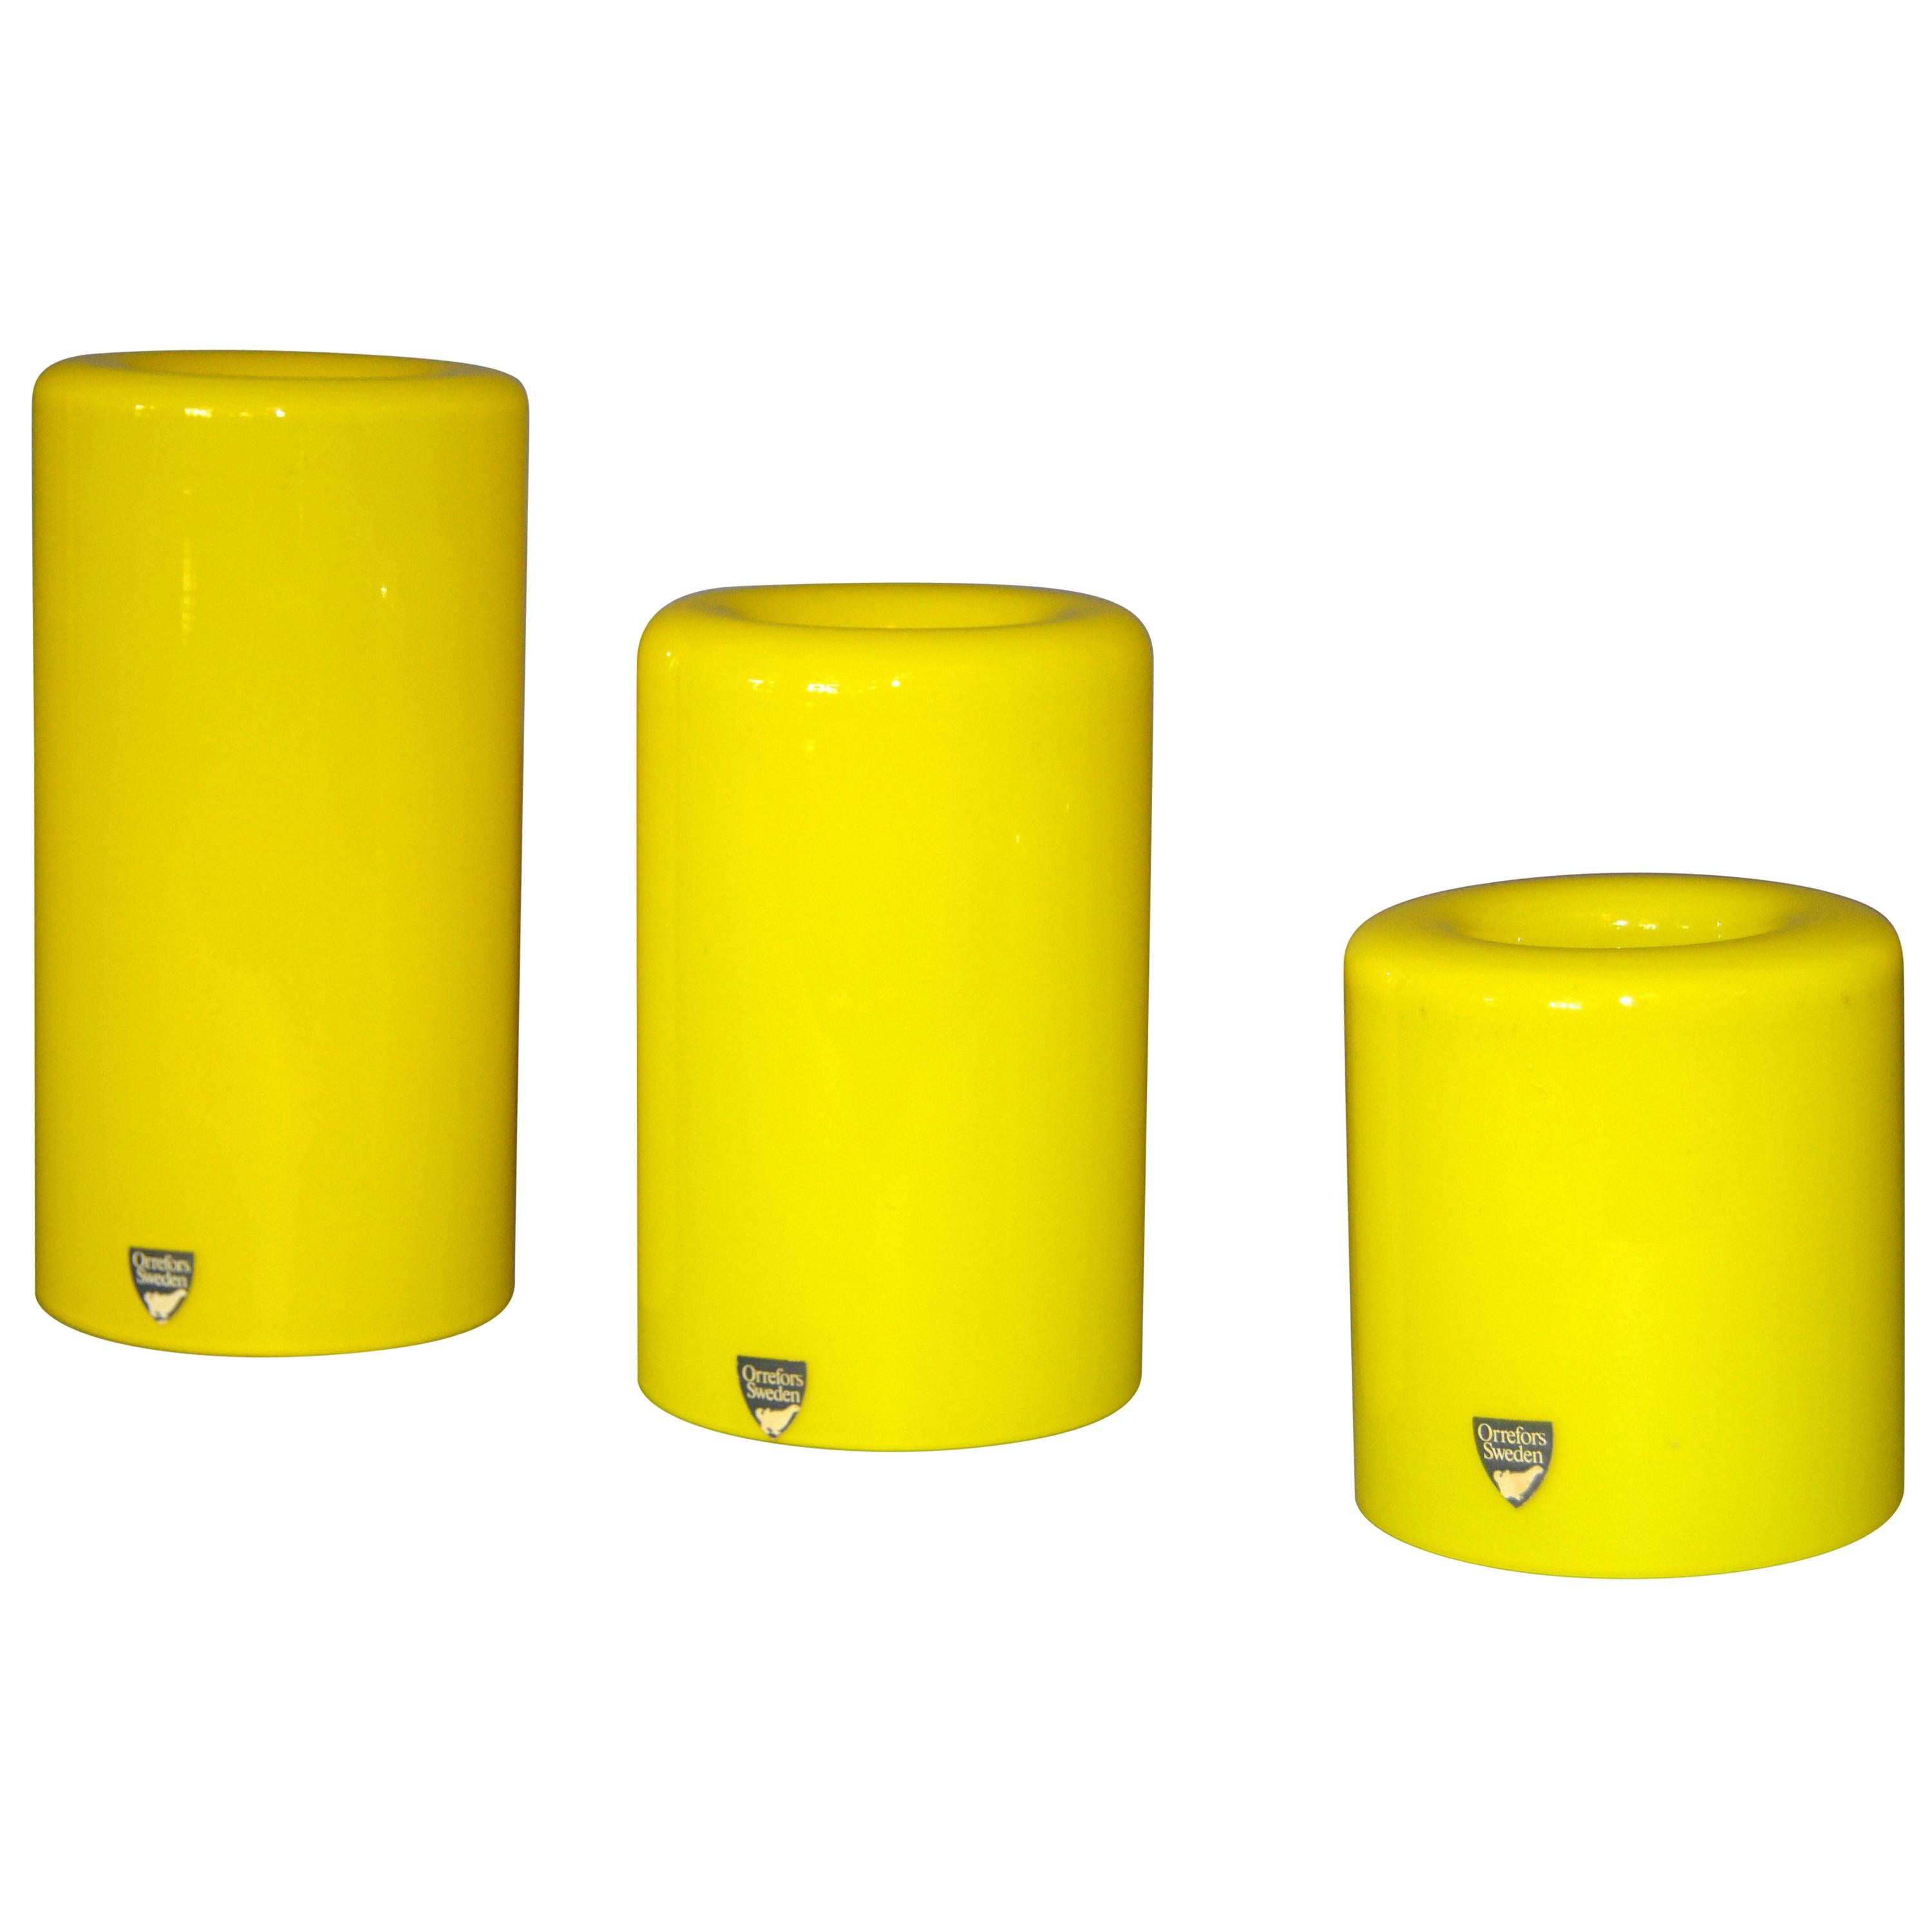 3 Orrefors Yellow Glass 'Eternell' Candlestick Holders, Designed by Owe Elvén